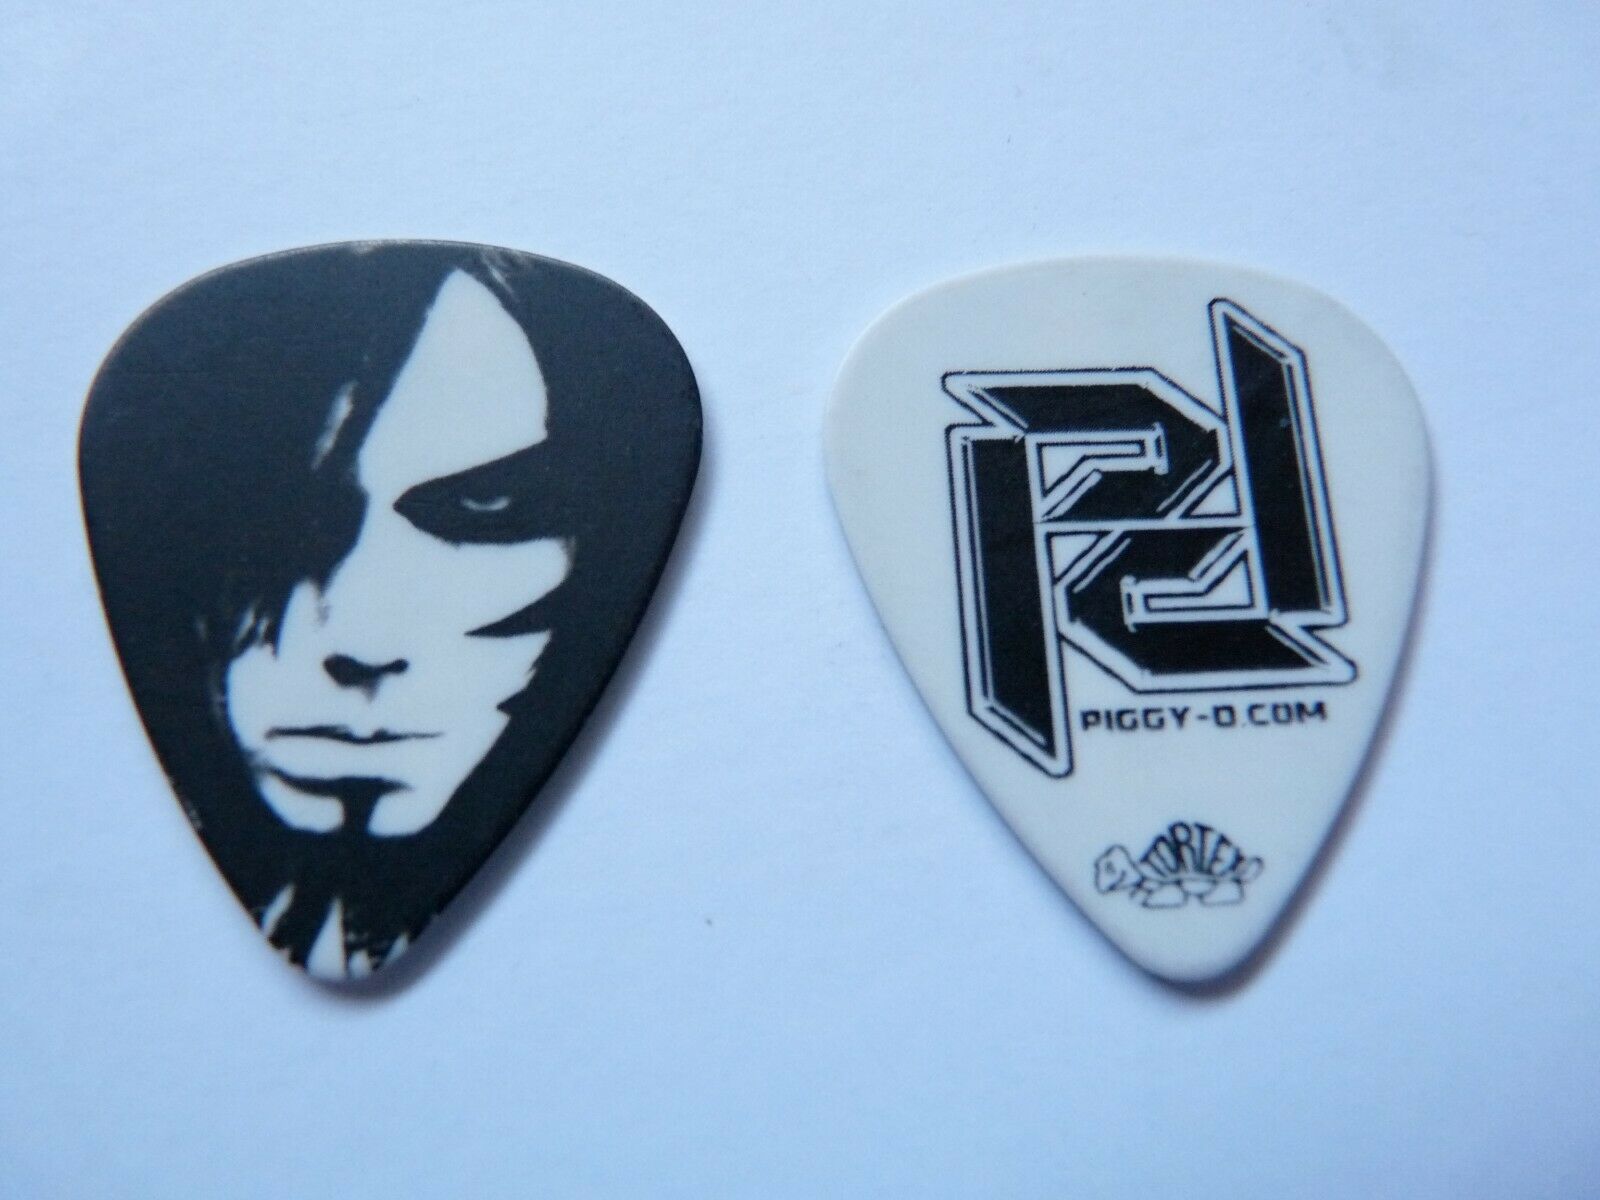 FILTER ROB PATTERSON 2010-2011 BLACK TOUR ISSUED GUITAR PICK RARE